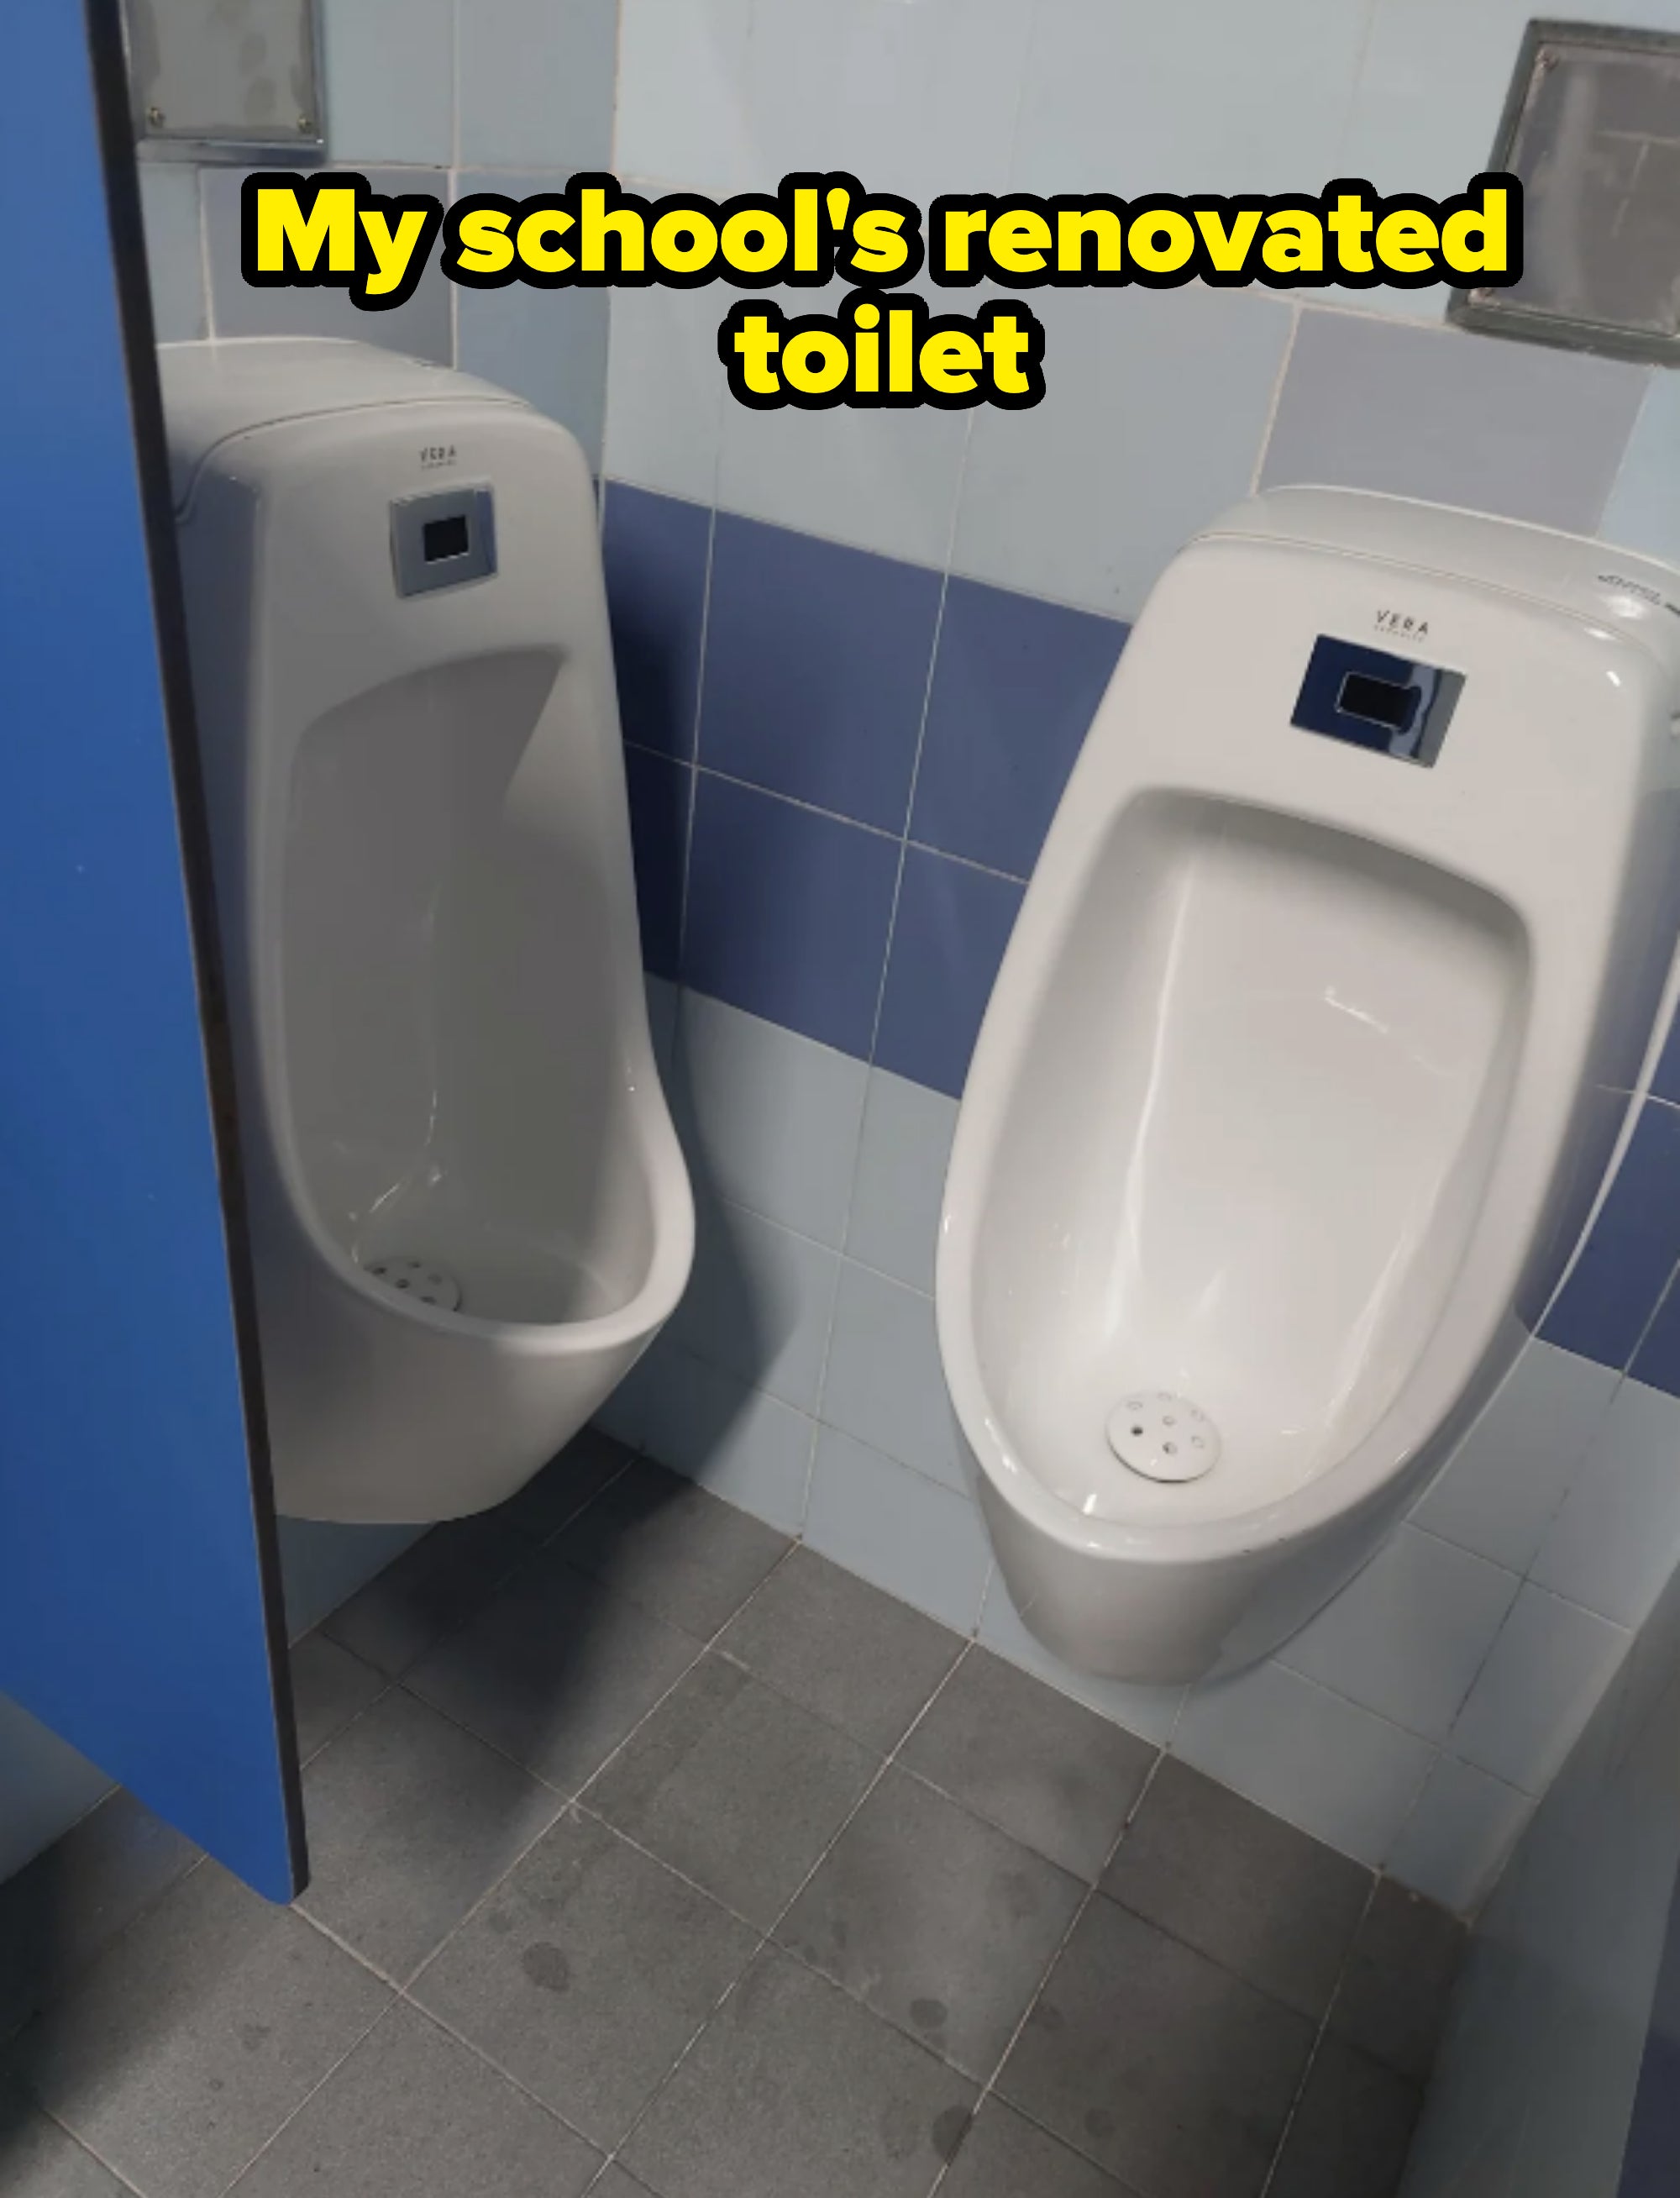 Two standard white urinals are installed side by side in a tiled public restroom. The restroom has light blue and white tiles